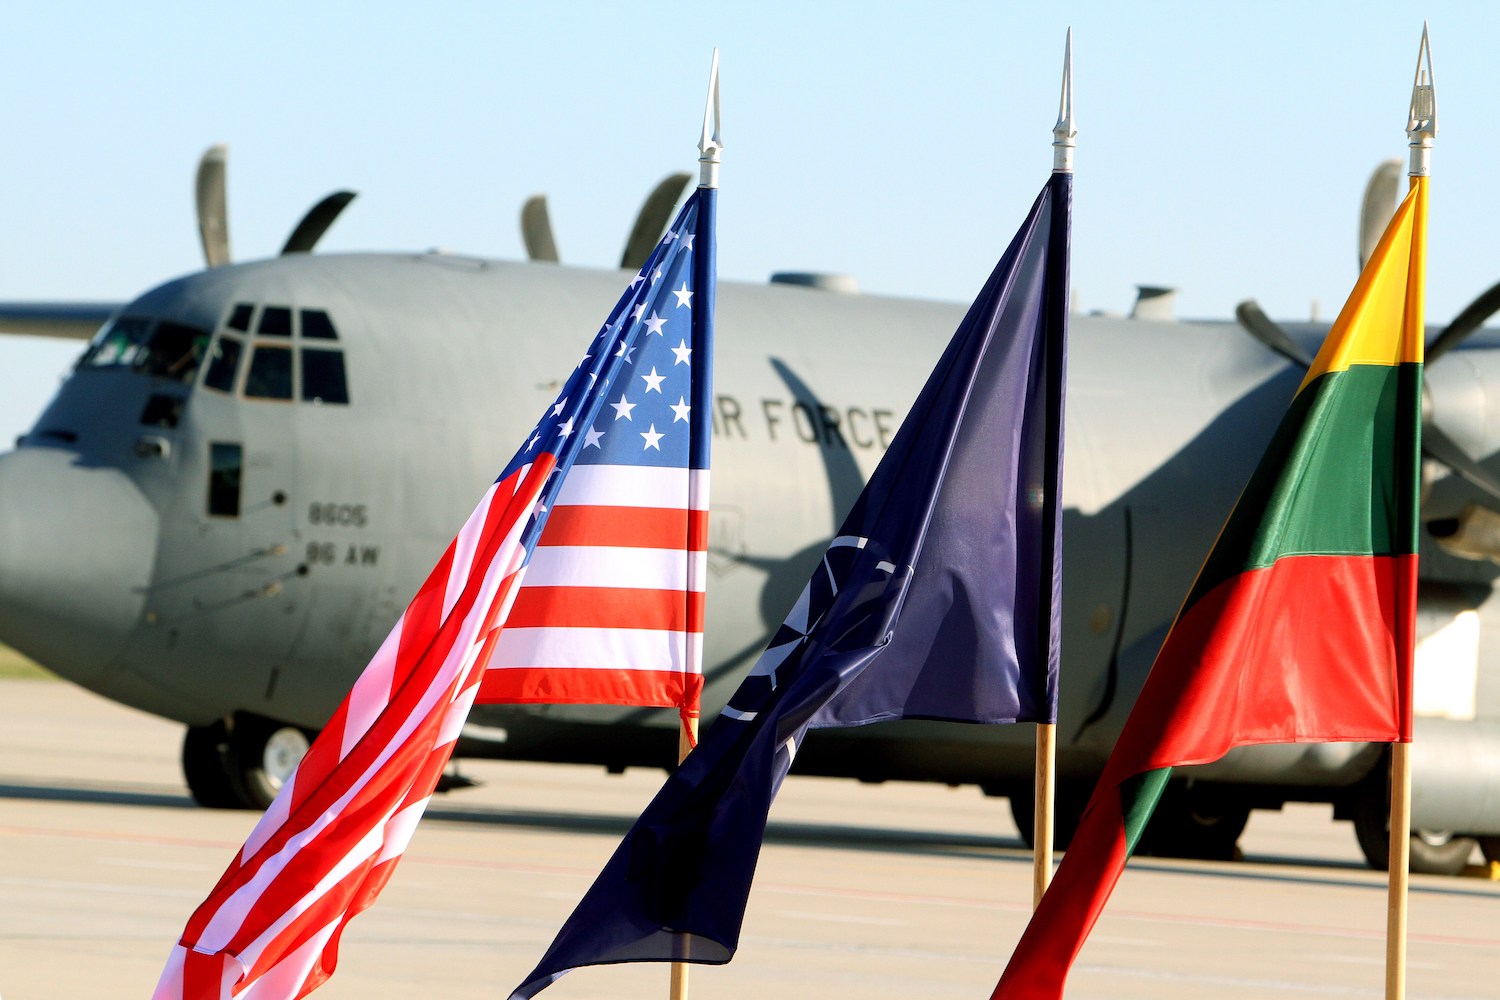 Flags of the US, NATO are hoisted in front of an aircraft of the US air force carrying US soldiers at the air force base near Siauliai Zuokniai, Lithuania, on April 26, 2014. US troops arrived in Lithuania, part of a US contingent of 600 sent to the region to reassure NATO allies amid the escalating Ukraine crisis. AFP PHOTO / PETRAS MALUKAS (Photo credit should read PETRAS MALUKAS/AFP via Getty Images)